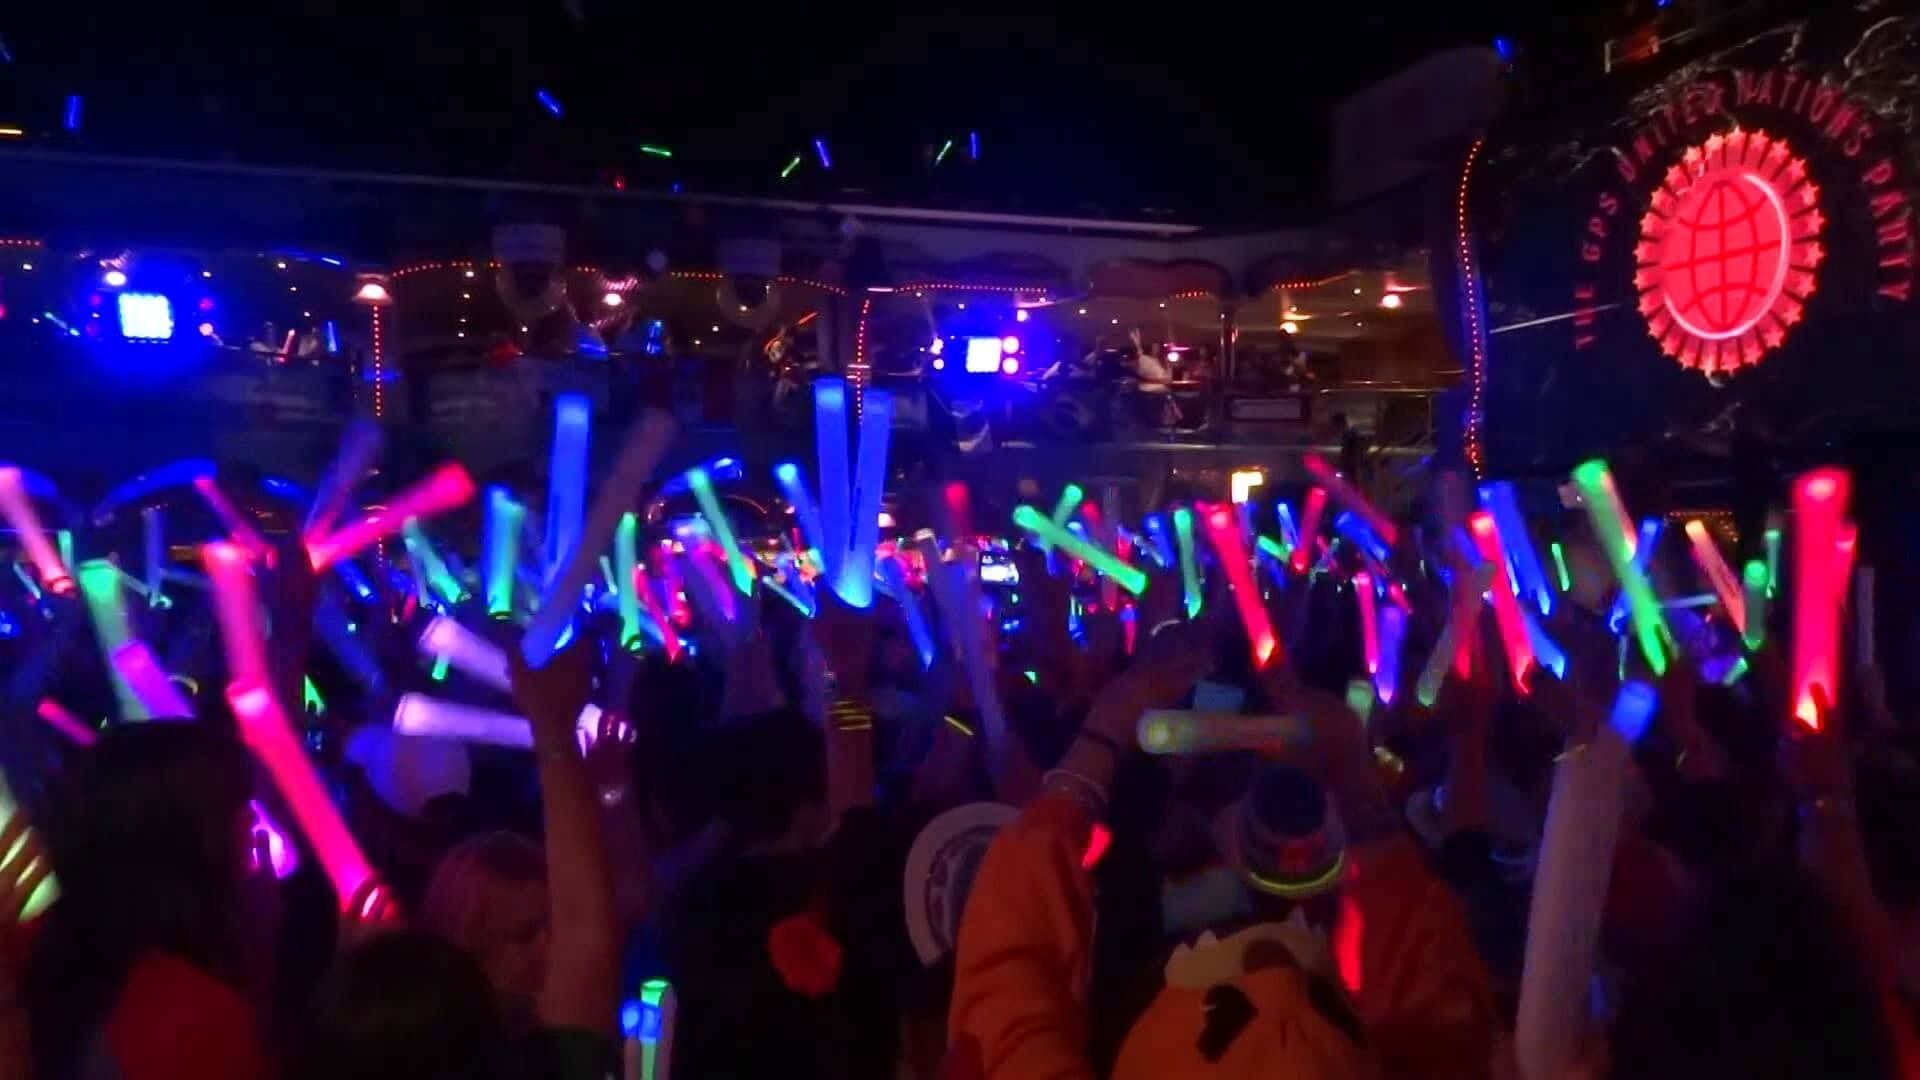 A Crowd Of People Holding Up Glow Sticks At A Nightclub